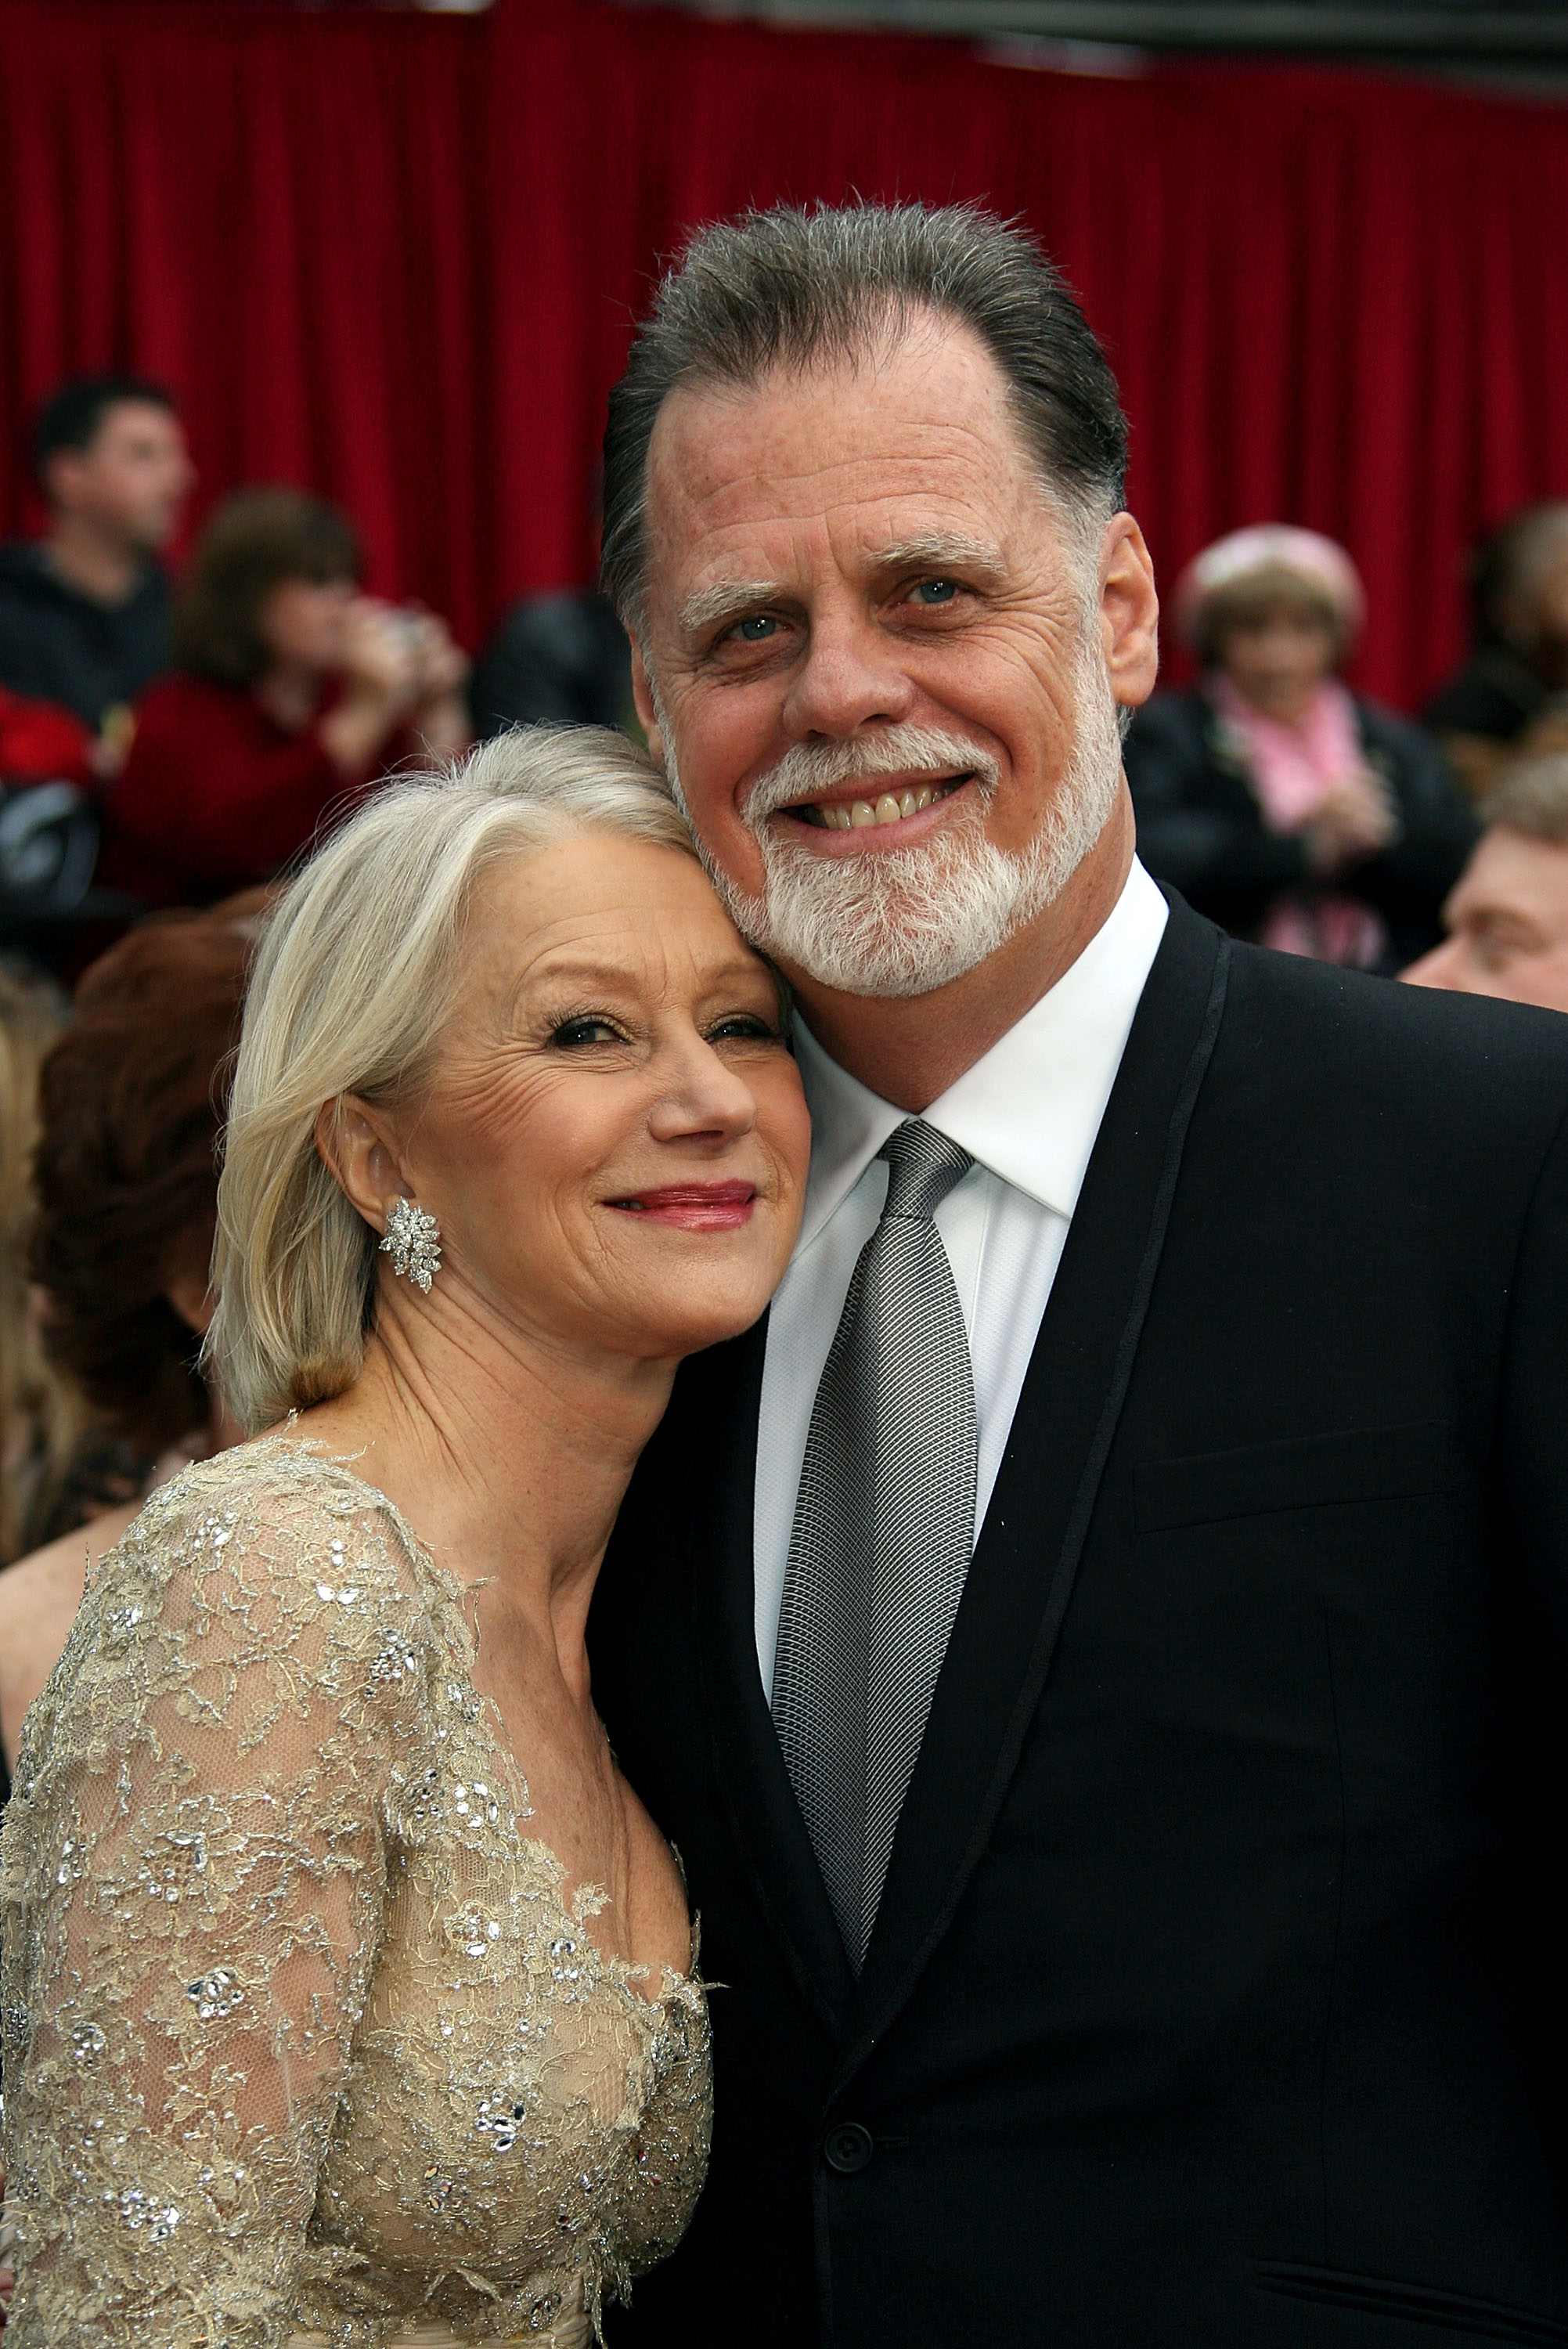 Dame Helen Mirren and her husband Taylor Hackford at the 79th Annual Academy Awards on February 25, 2007, in Hollywood, California | Source: Getty Images